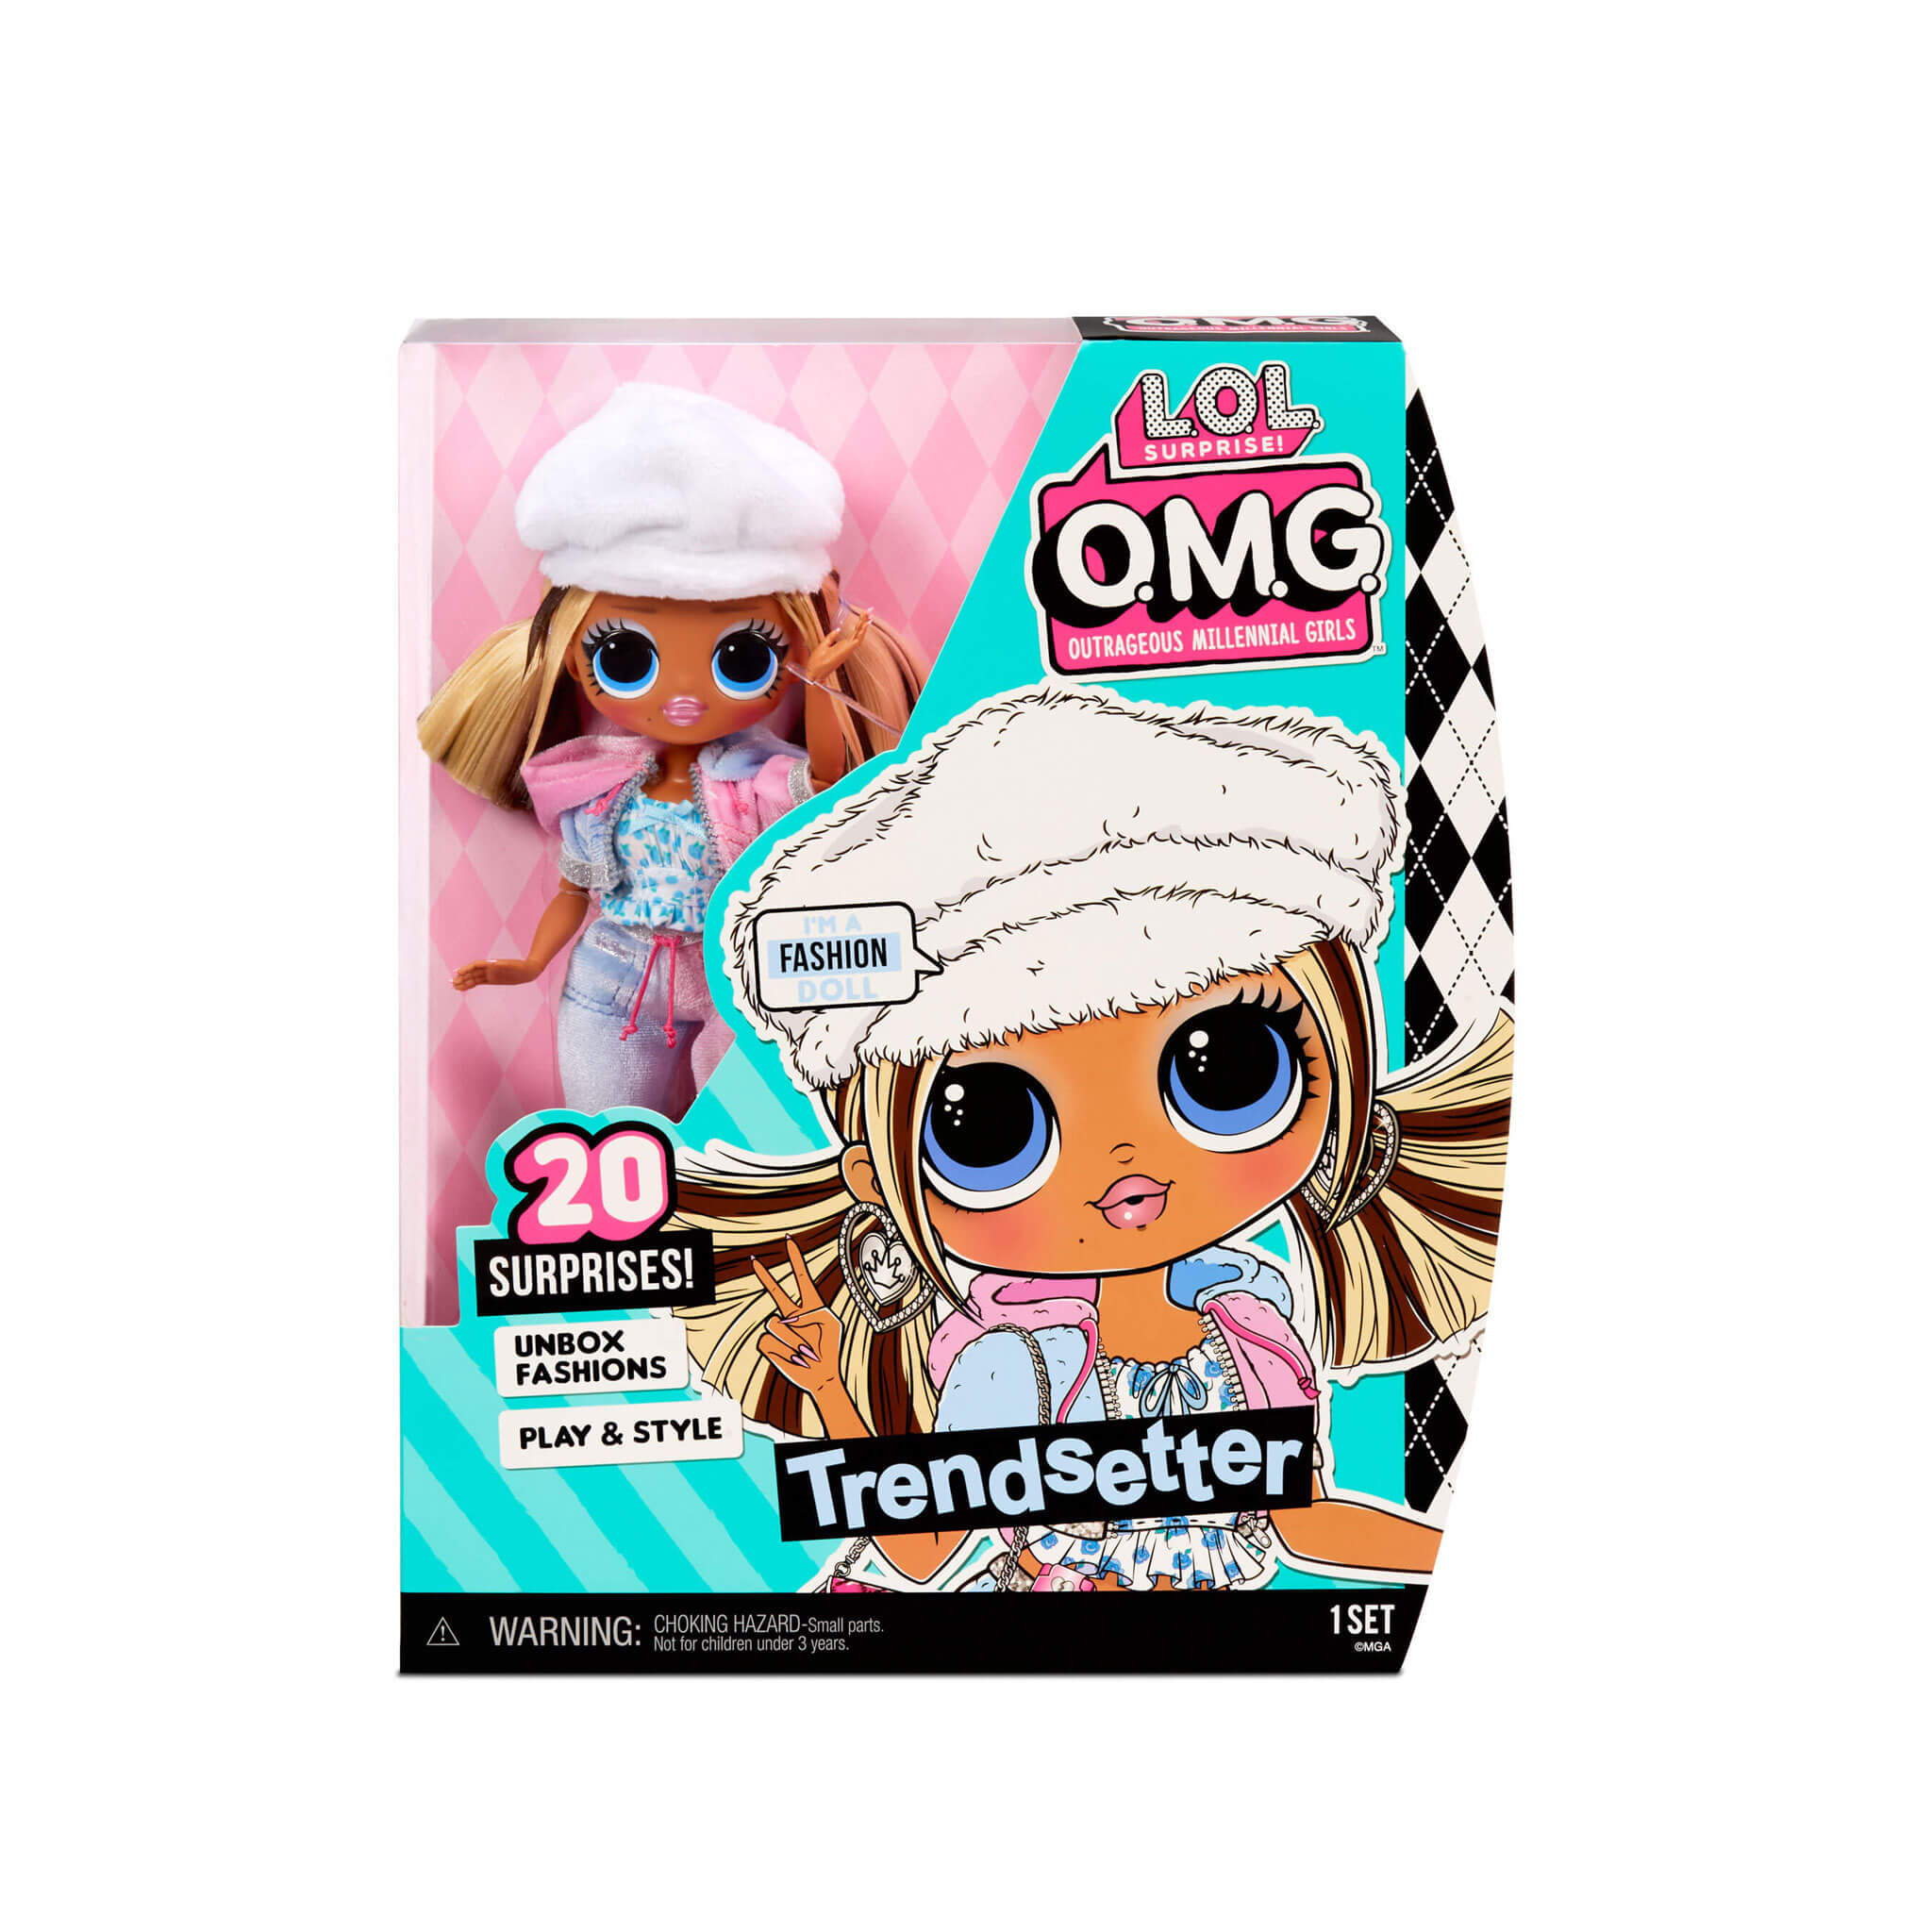 OMG Trendsetter Fashion Doll with 20 Surprises – The MGA Shop